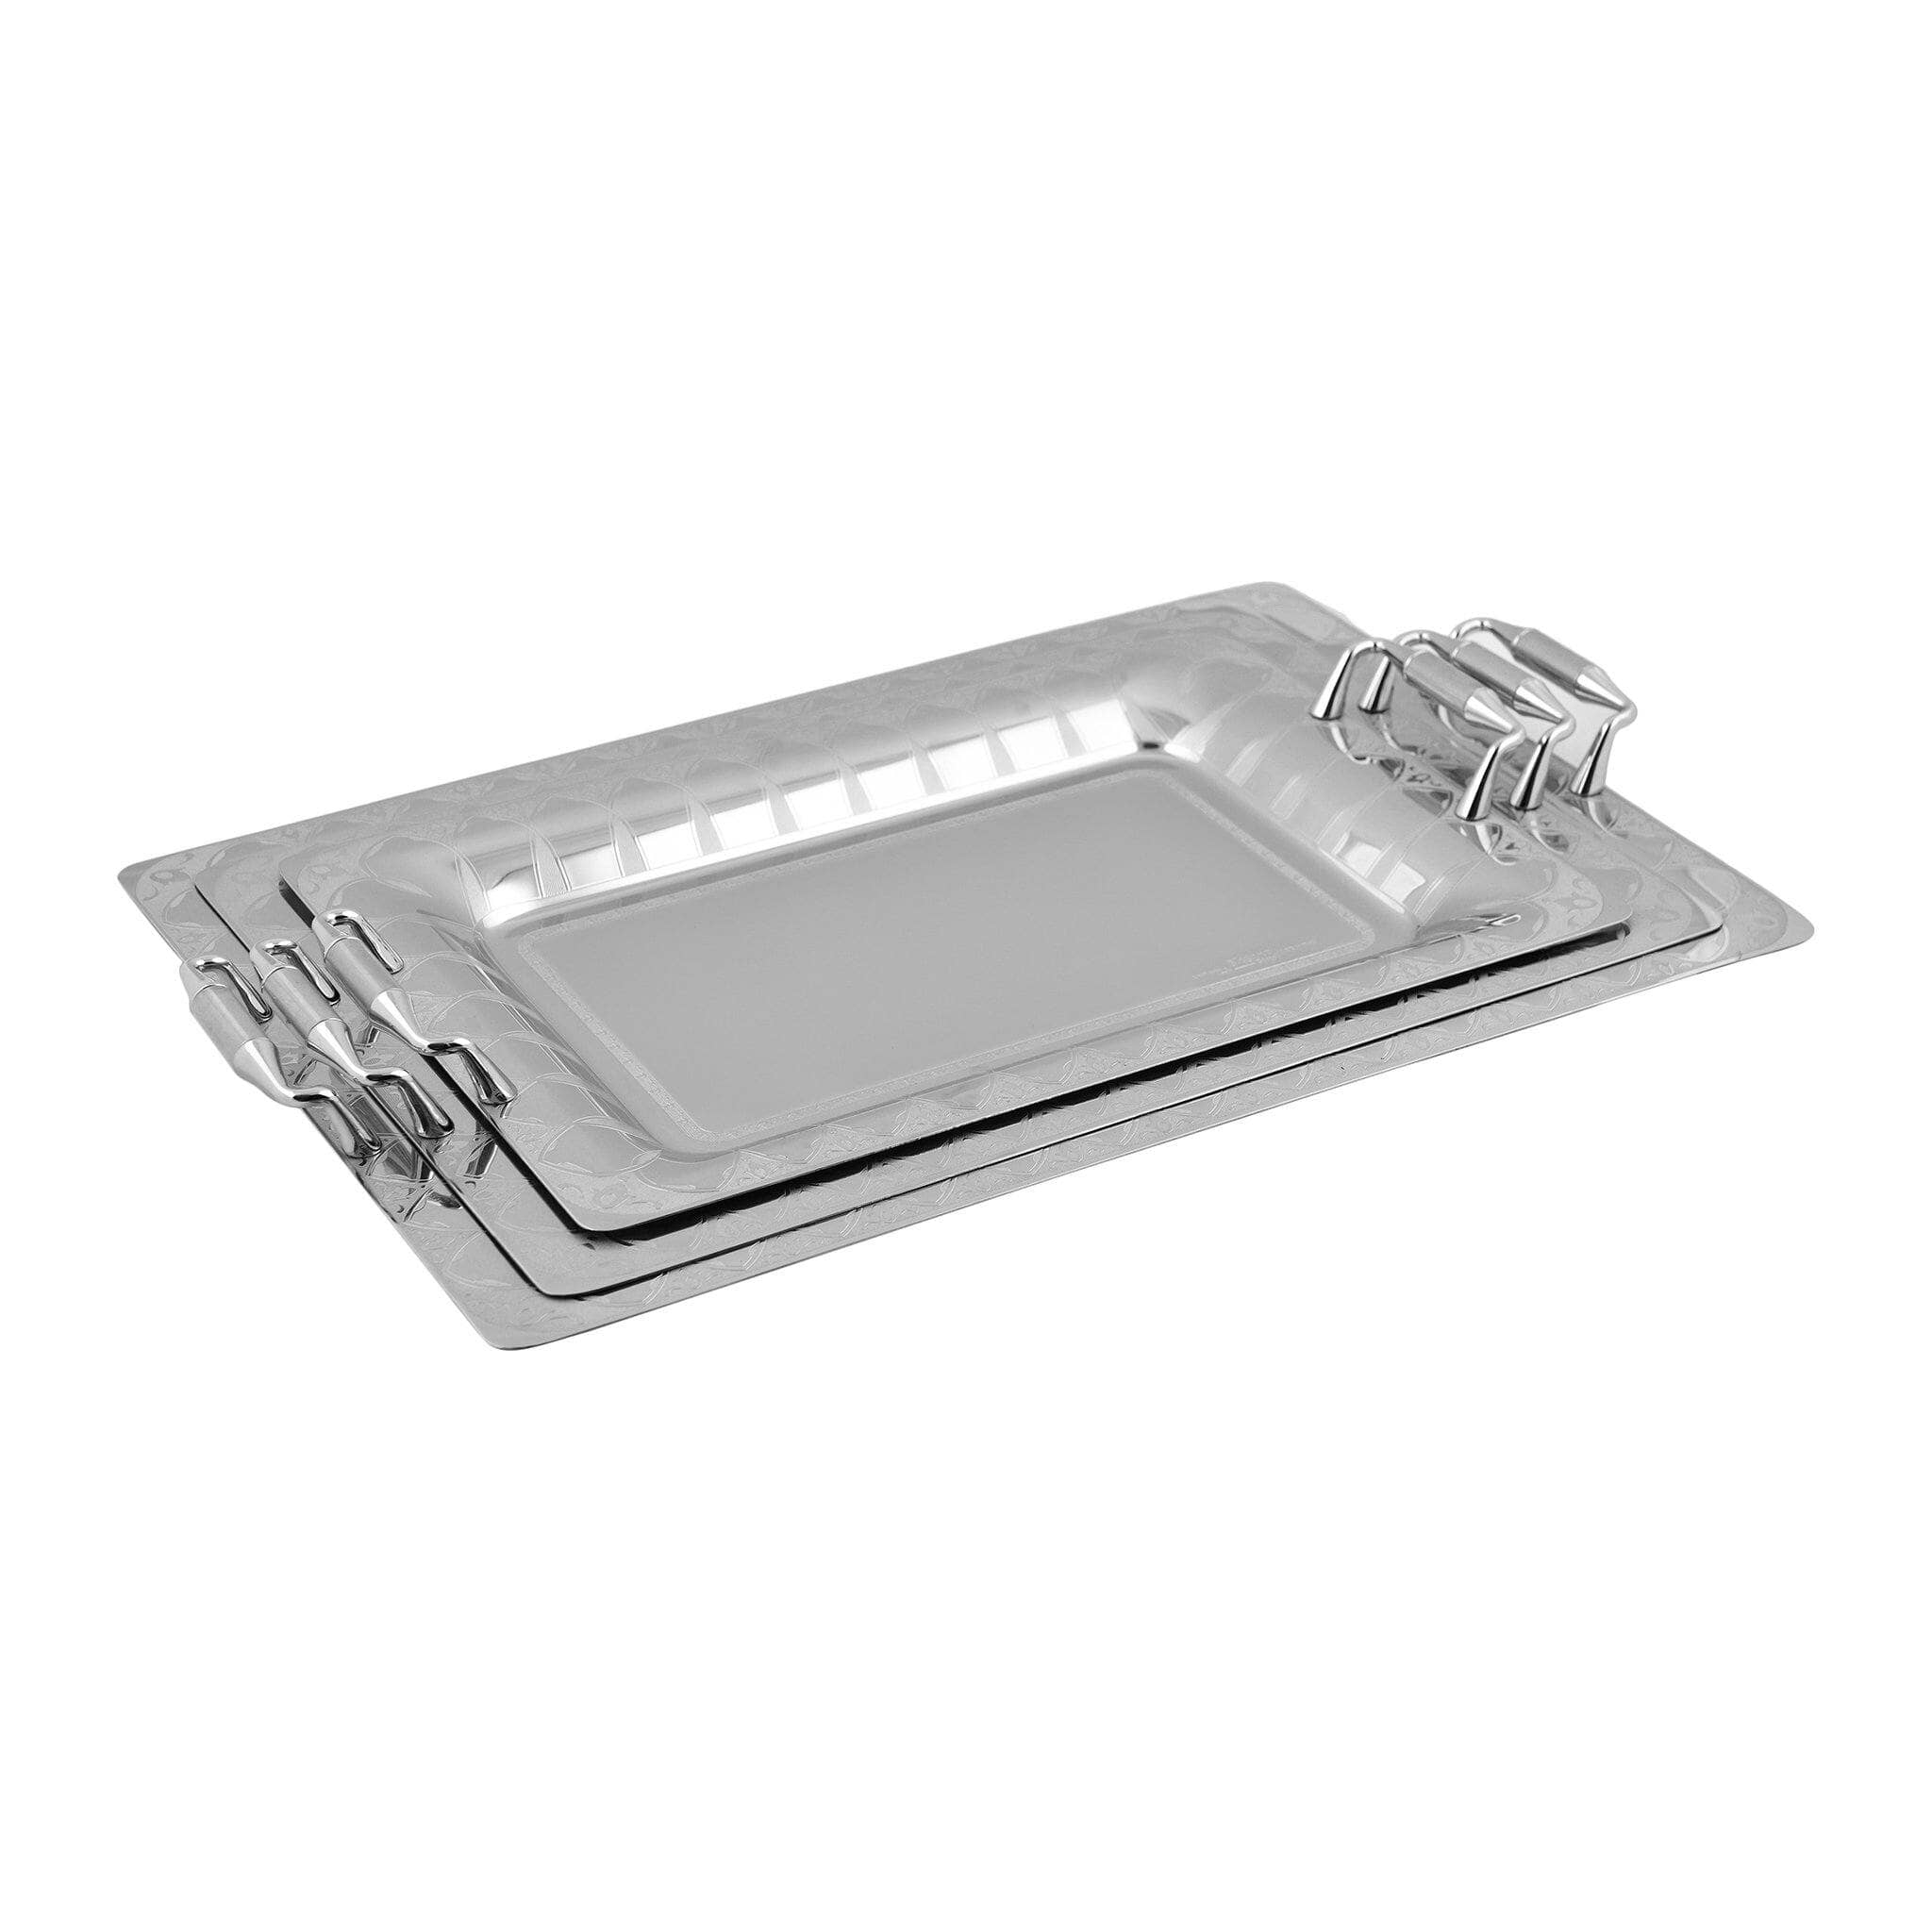 Elegant Gioiel - Rectangular Tray Set with Handles 3 Pieces - Stainless Steel 18/10 - 75000224